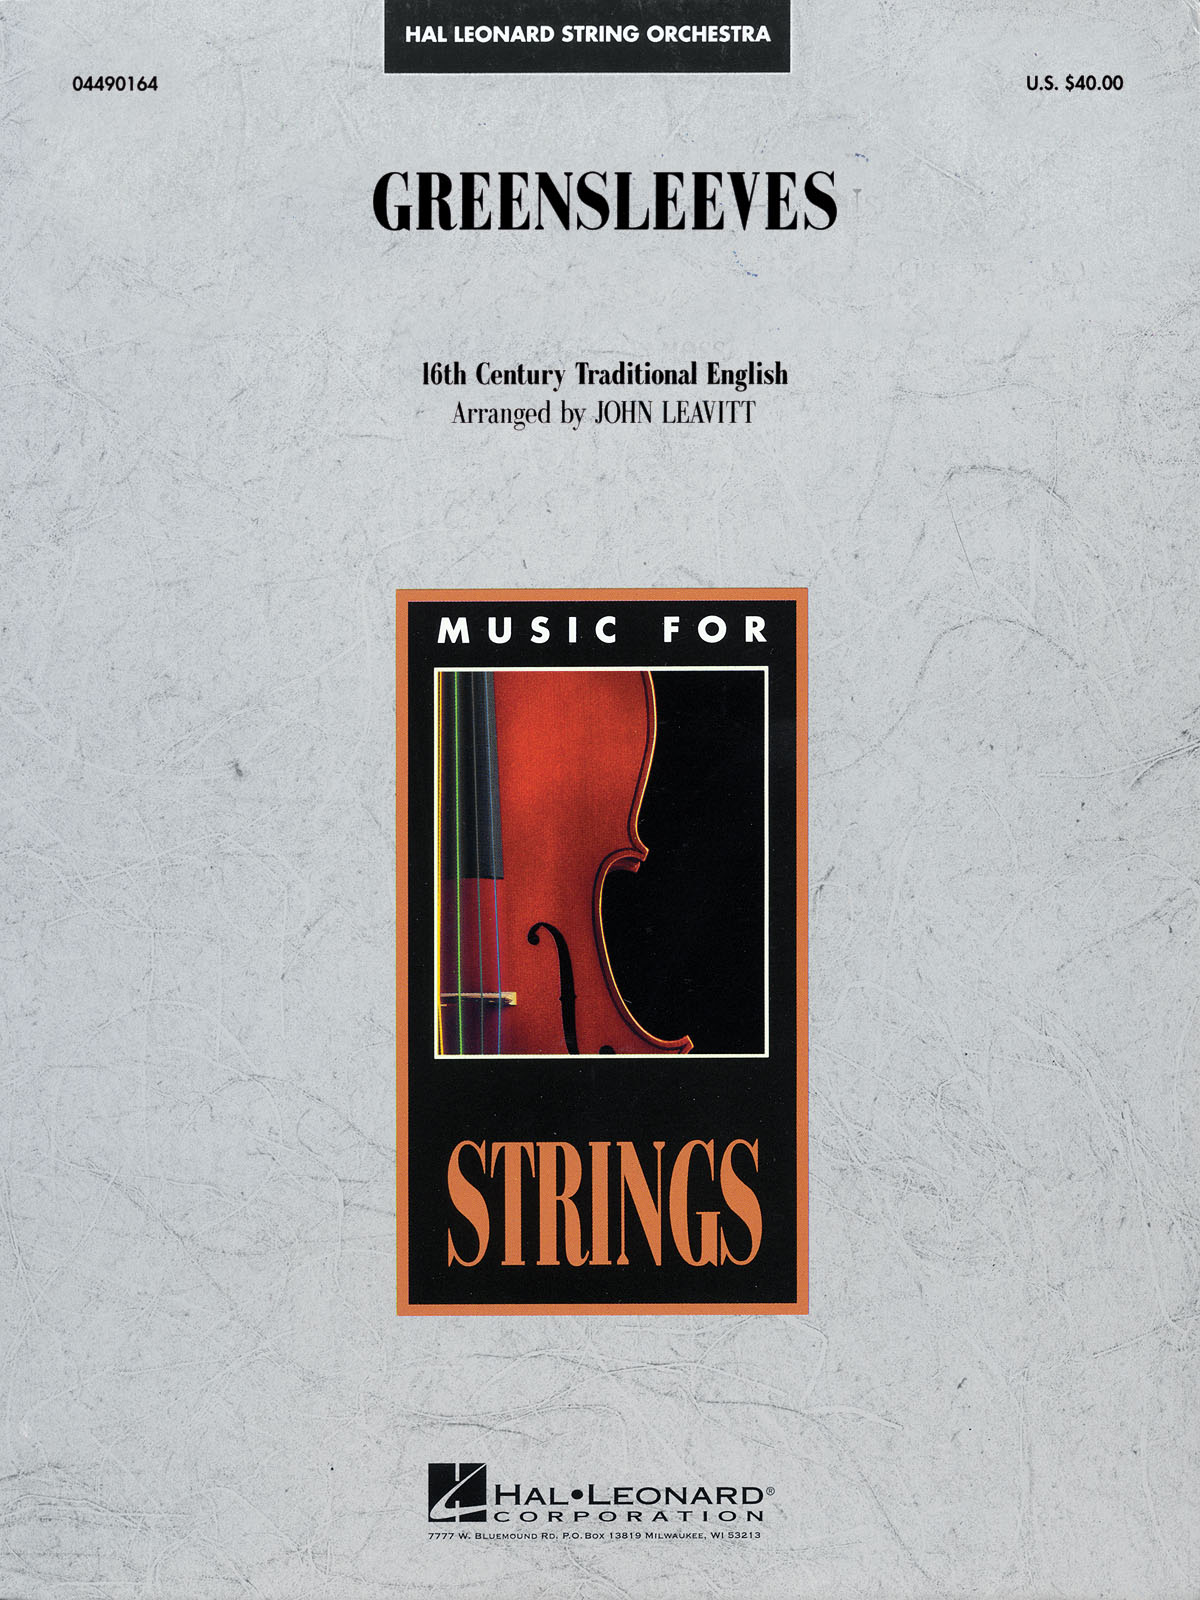 Greensleeves: String Orchestra: Score & Parts